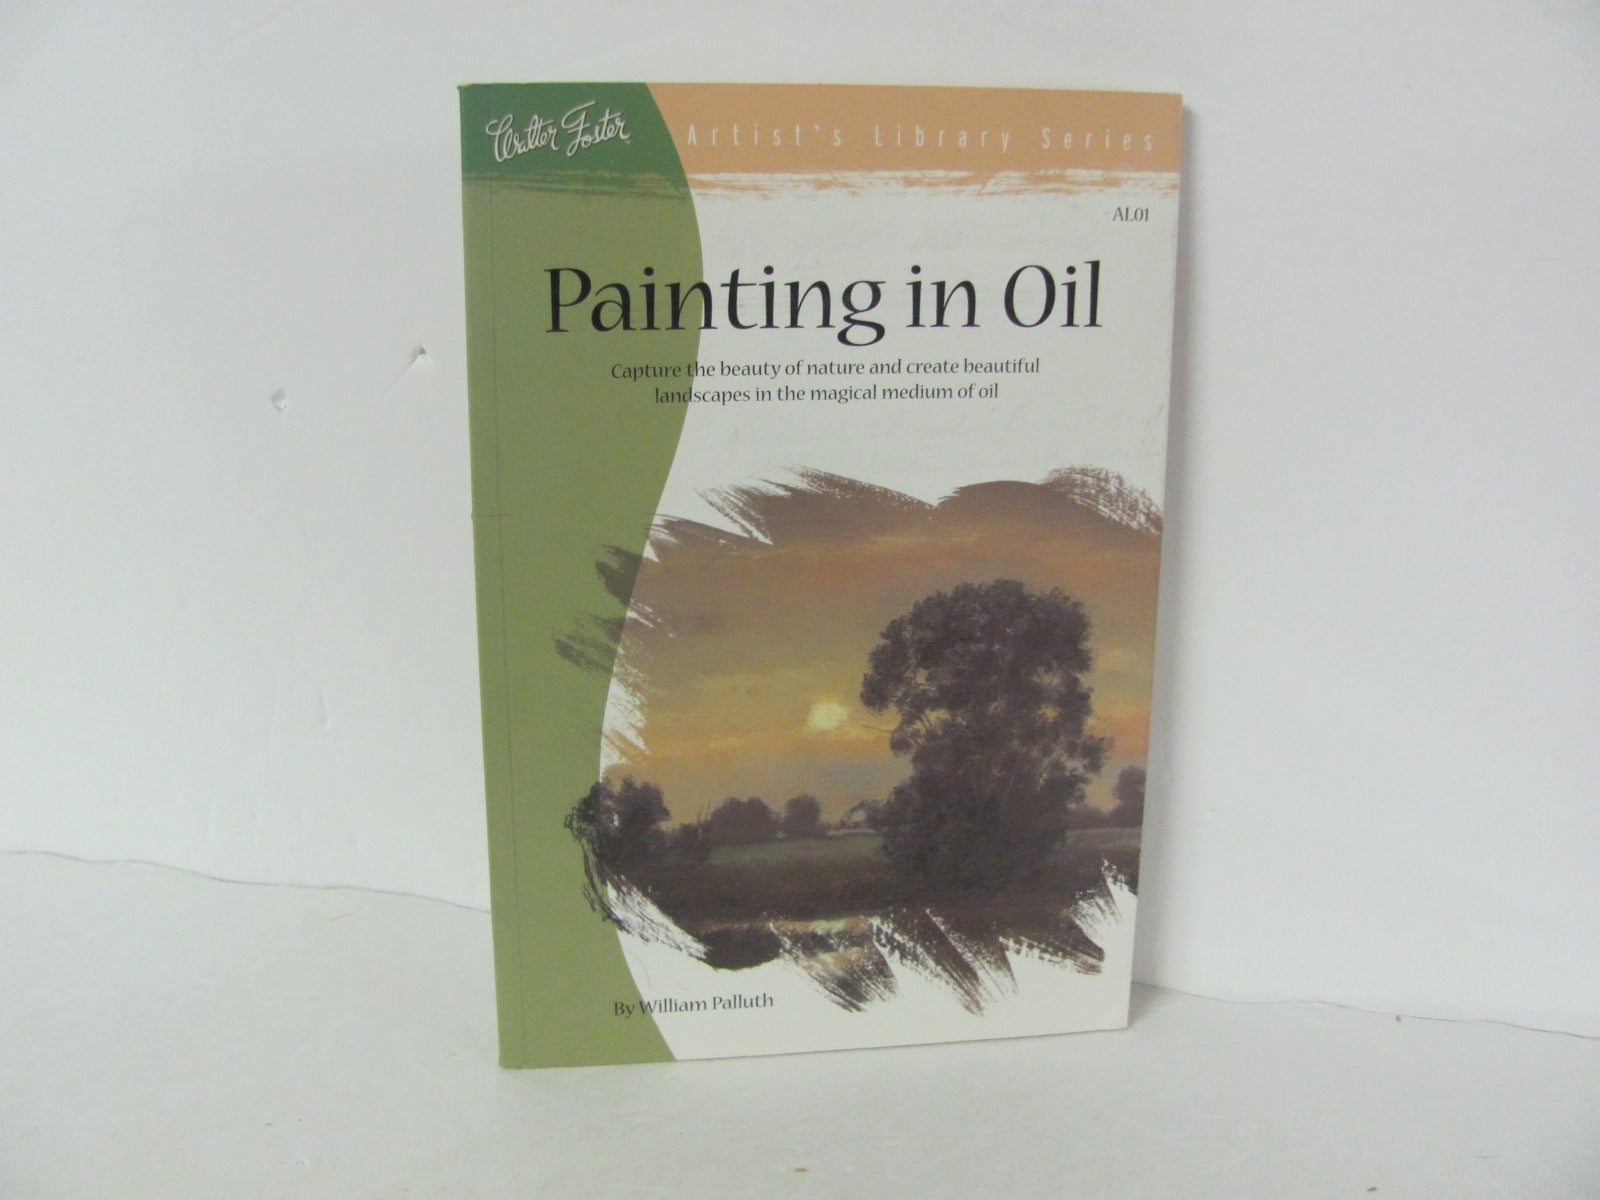 The Art of Basic Oil Painting - Walter Foster